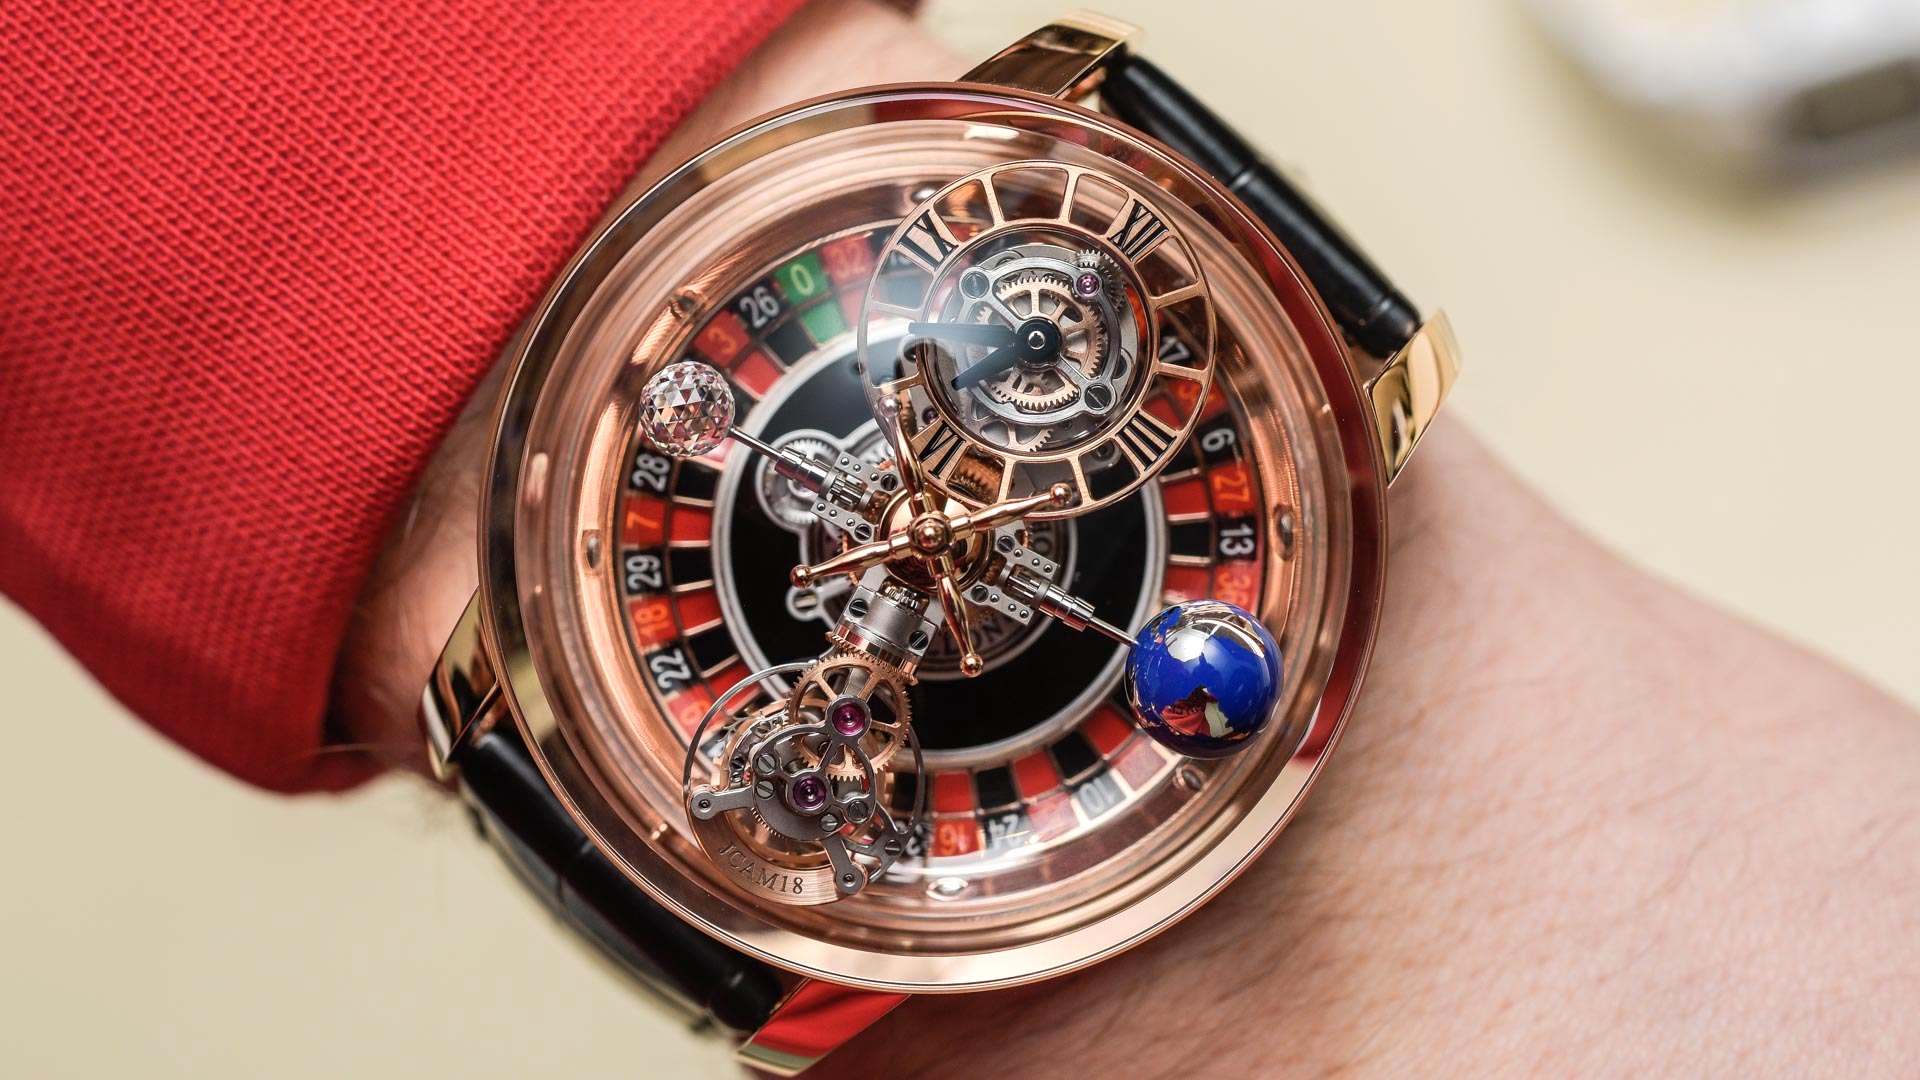 Astronomia Casino: The Ultimate Timepiece by Jacob & Co